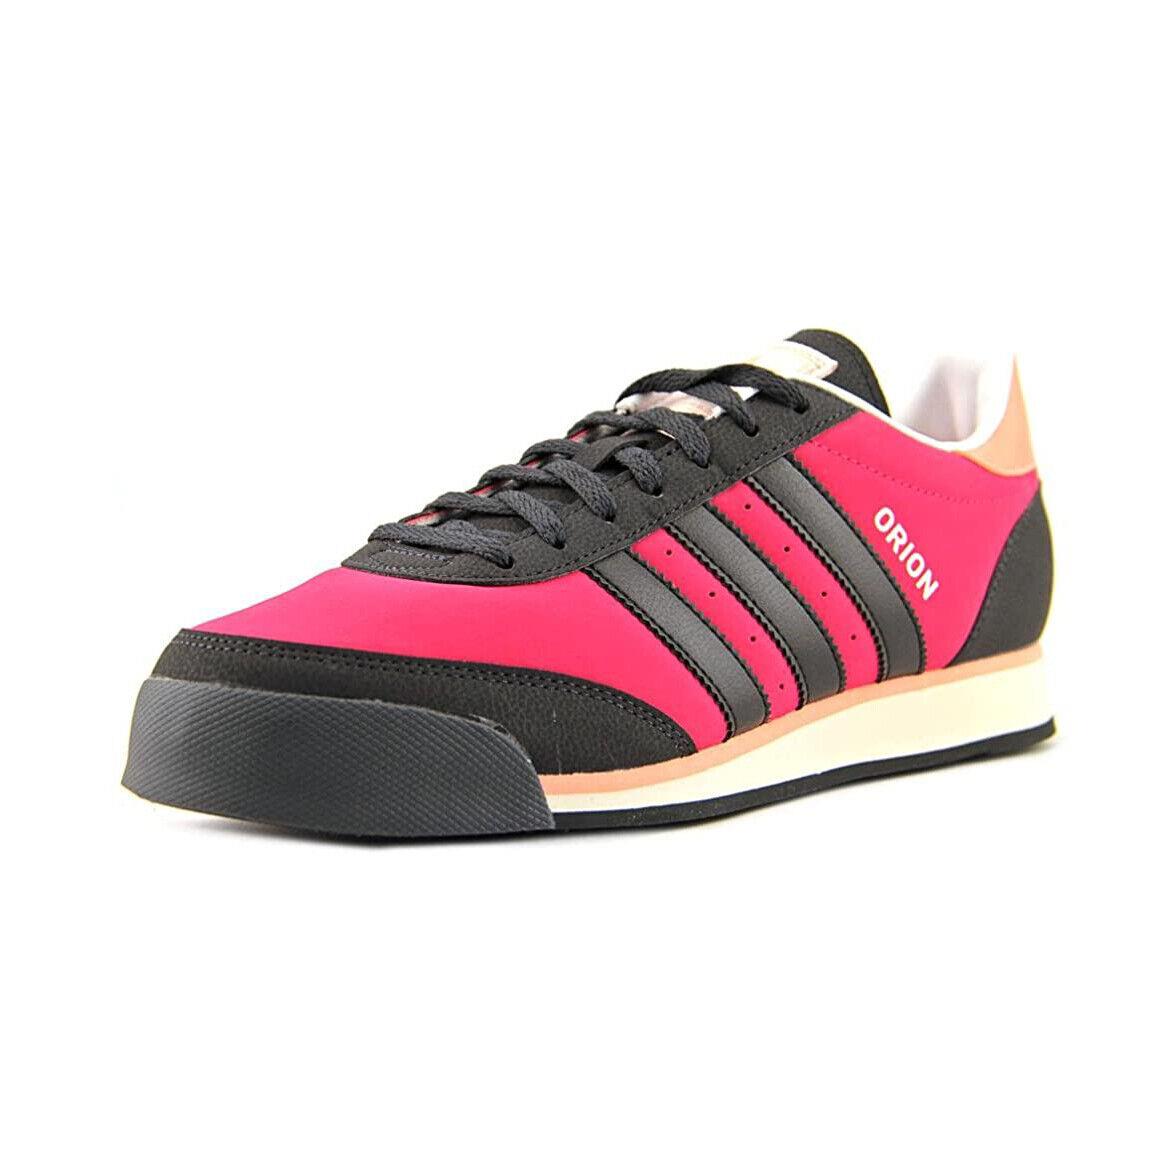 Adidas Orion 2 Women Shoes Sneakers G98054